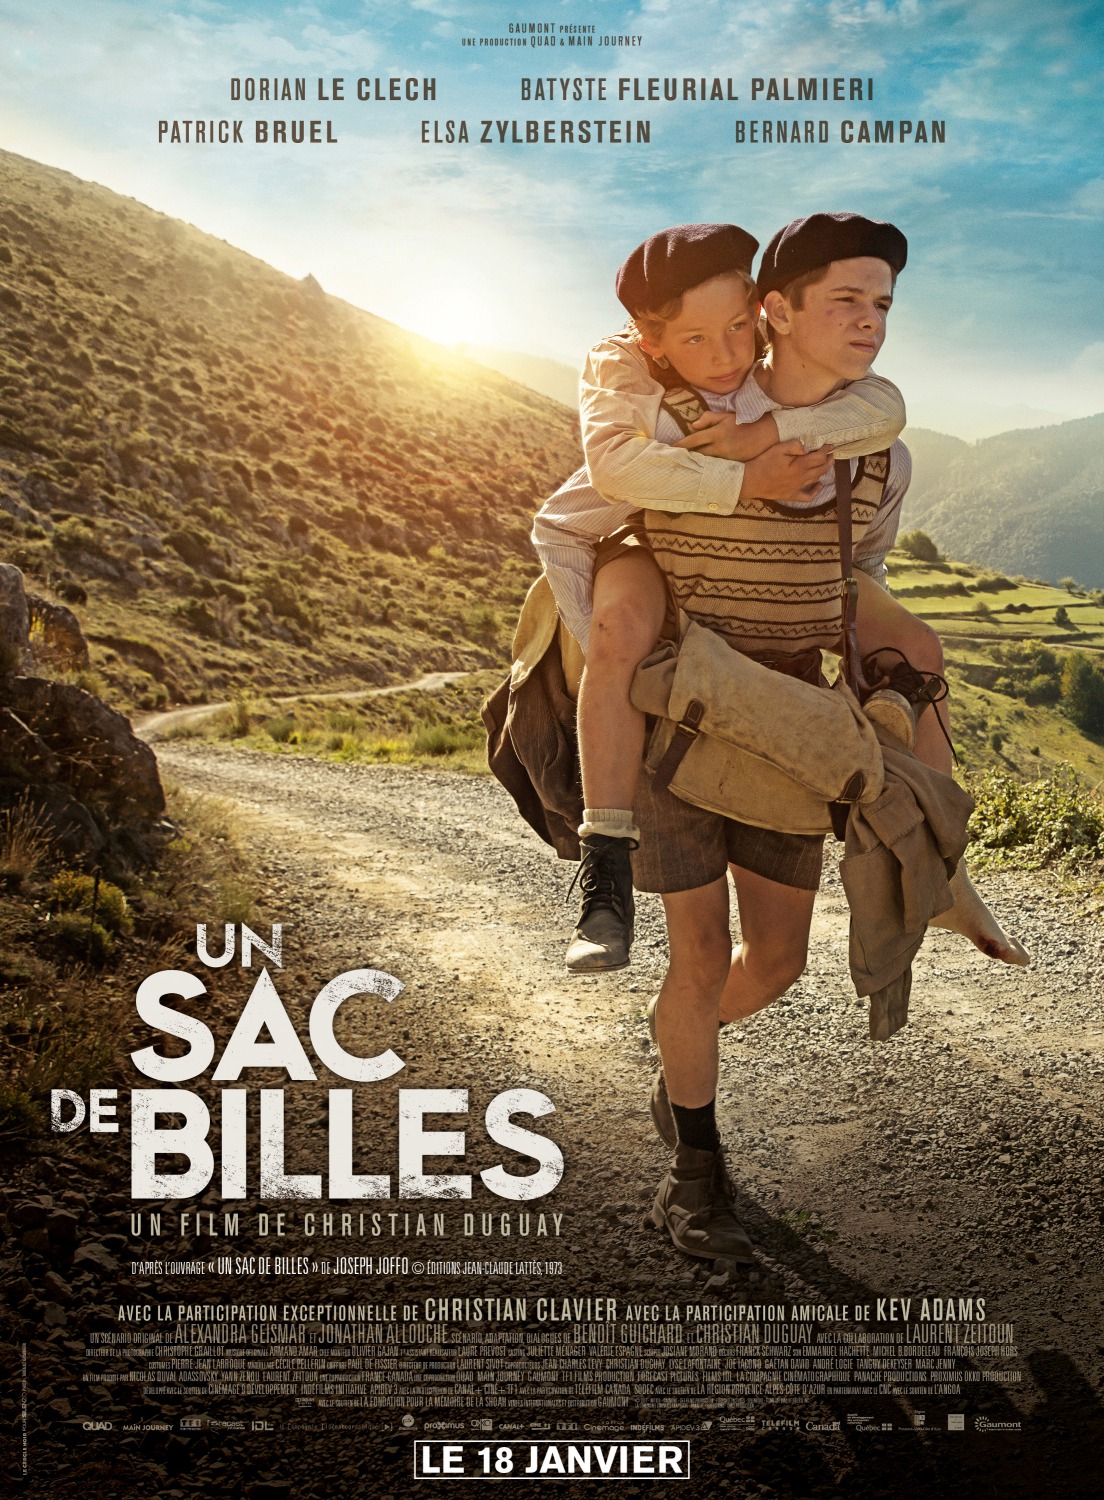 Extra Large Movie Poster Image for Un sac de billes (#1 of 3)